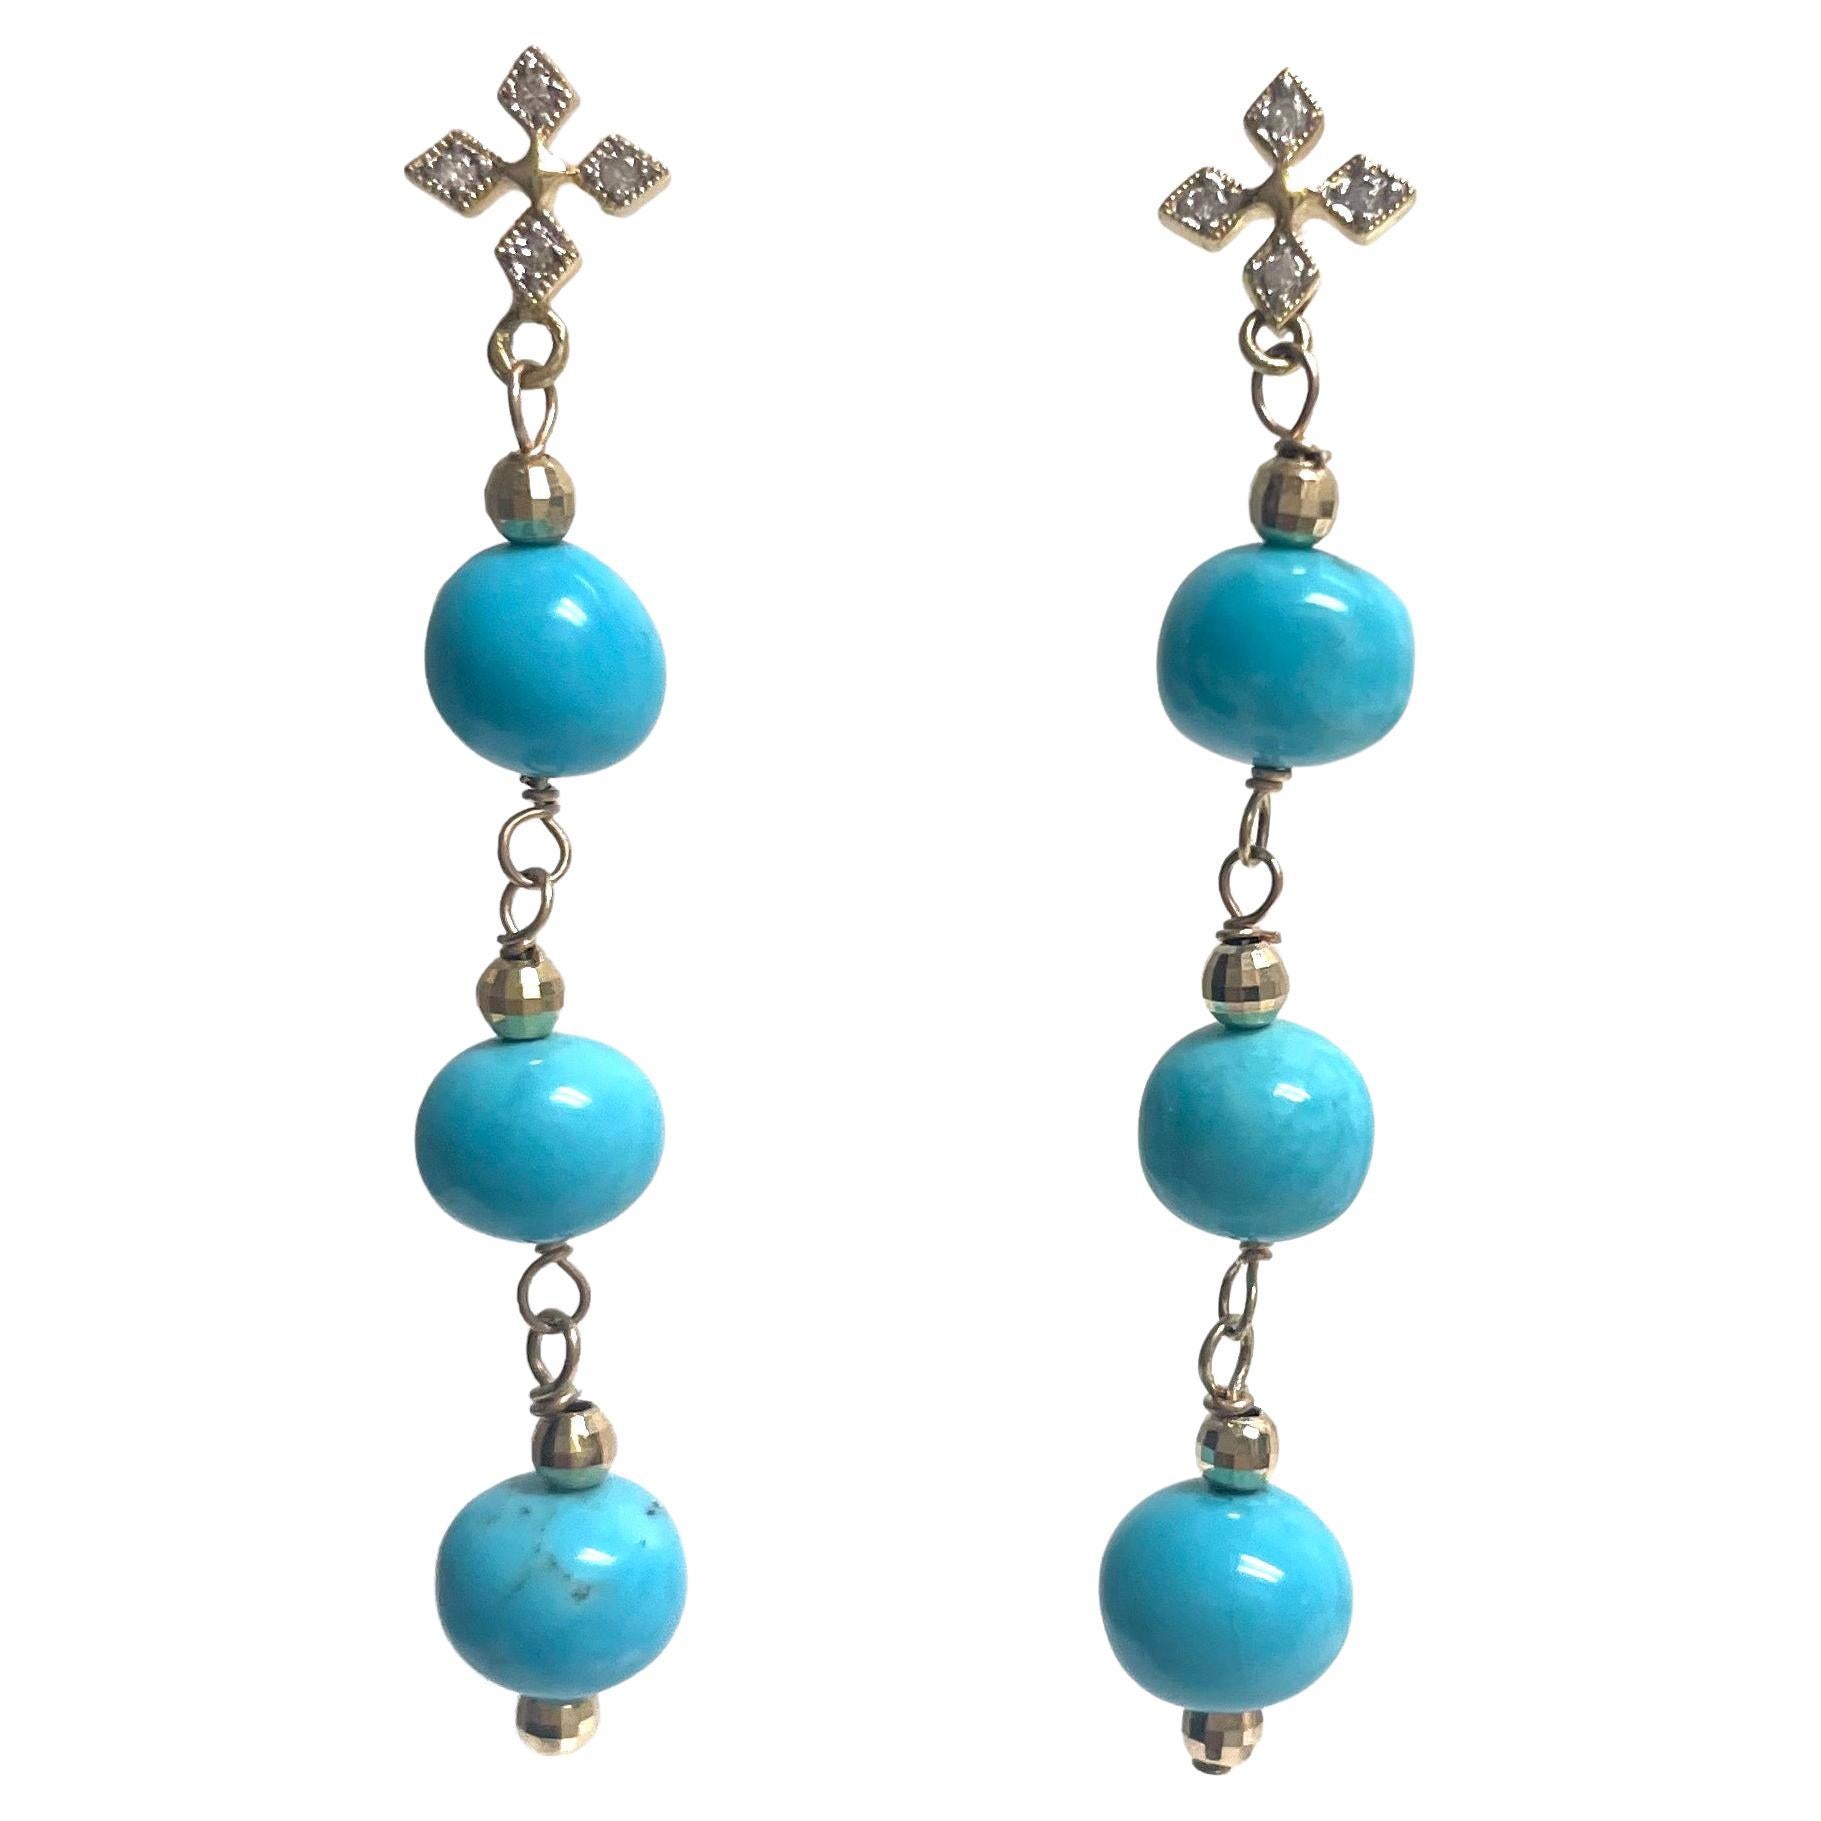 Description
Beautiful, vibrant Sleeping Beauty turquoise individually wire wrapped suspended from pave diamond ear posts and accented with small yellow gold faceted balls to create a harmonious feminine style. 
Item # E3400
Pair with matching